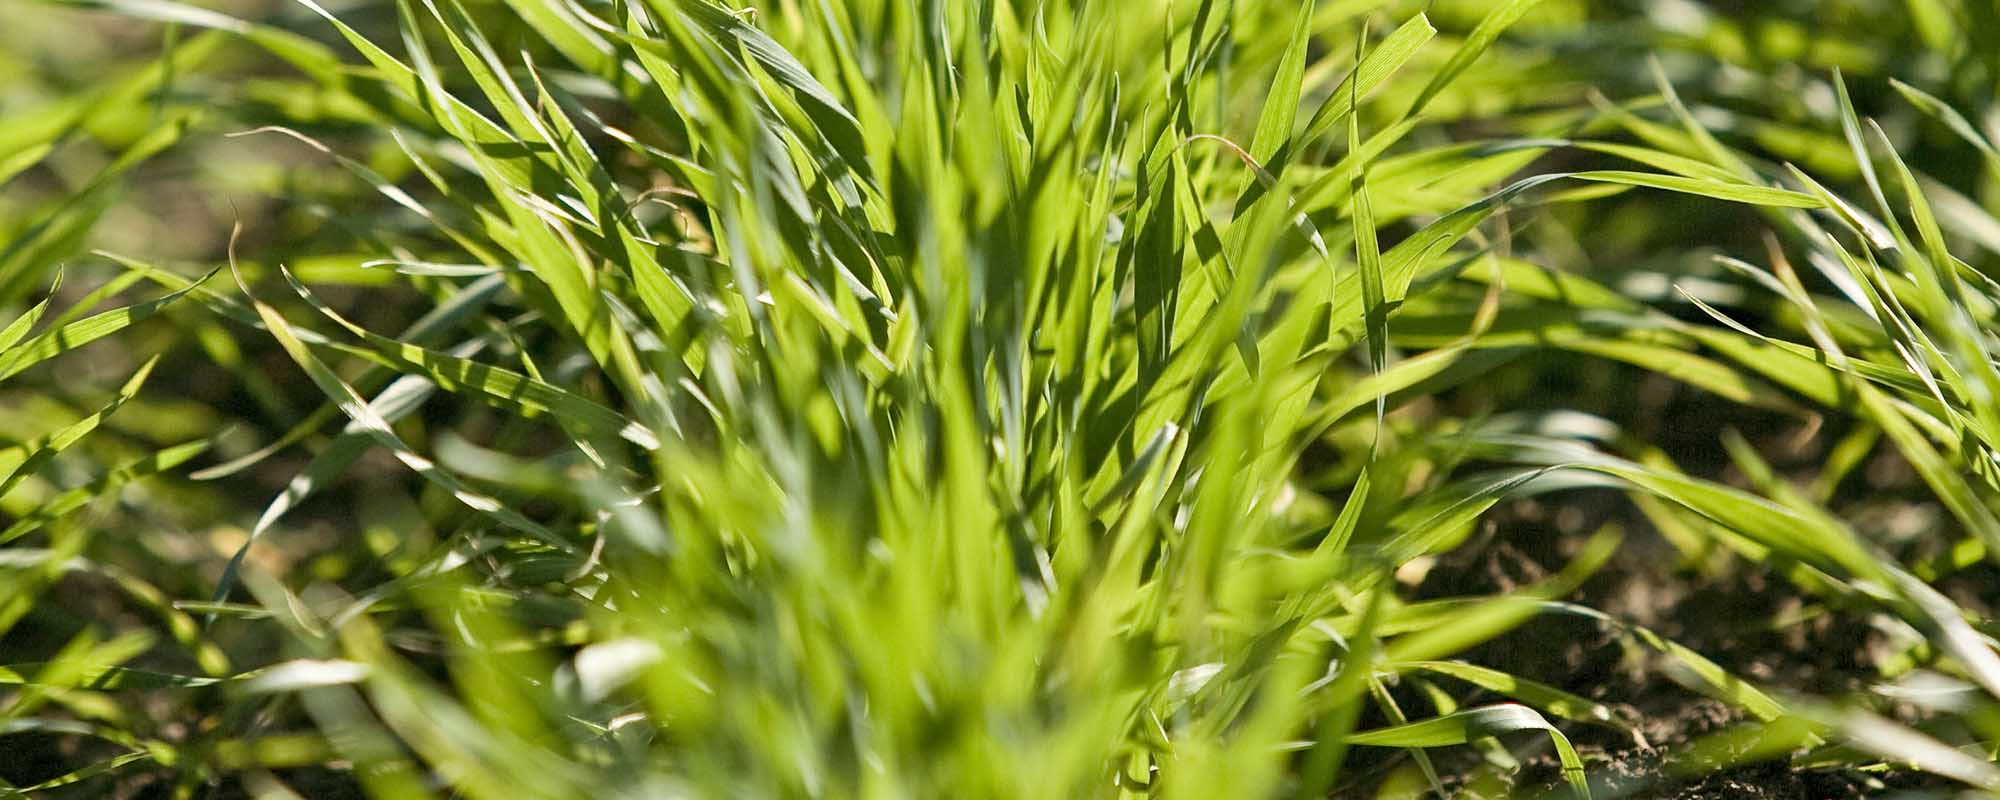 small grains plants growing in pasture